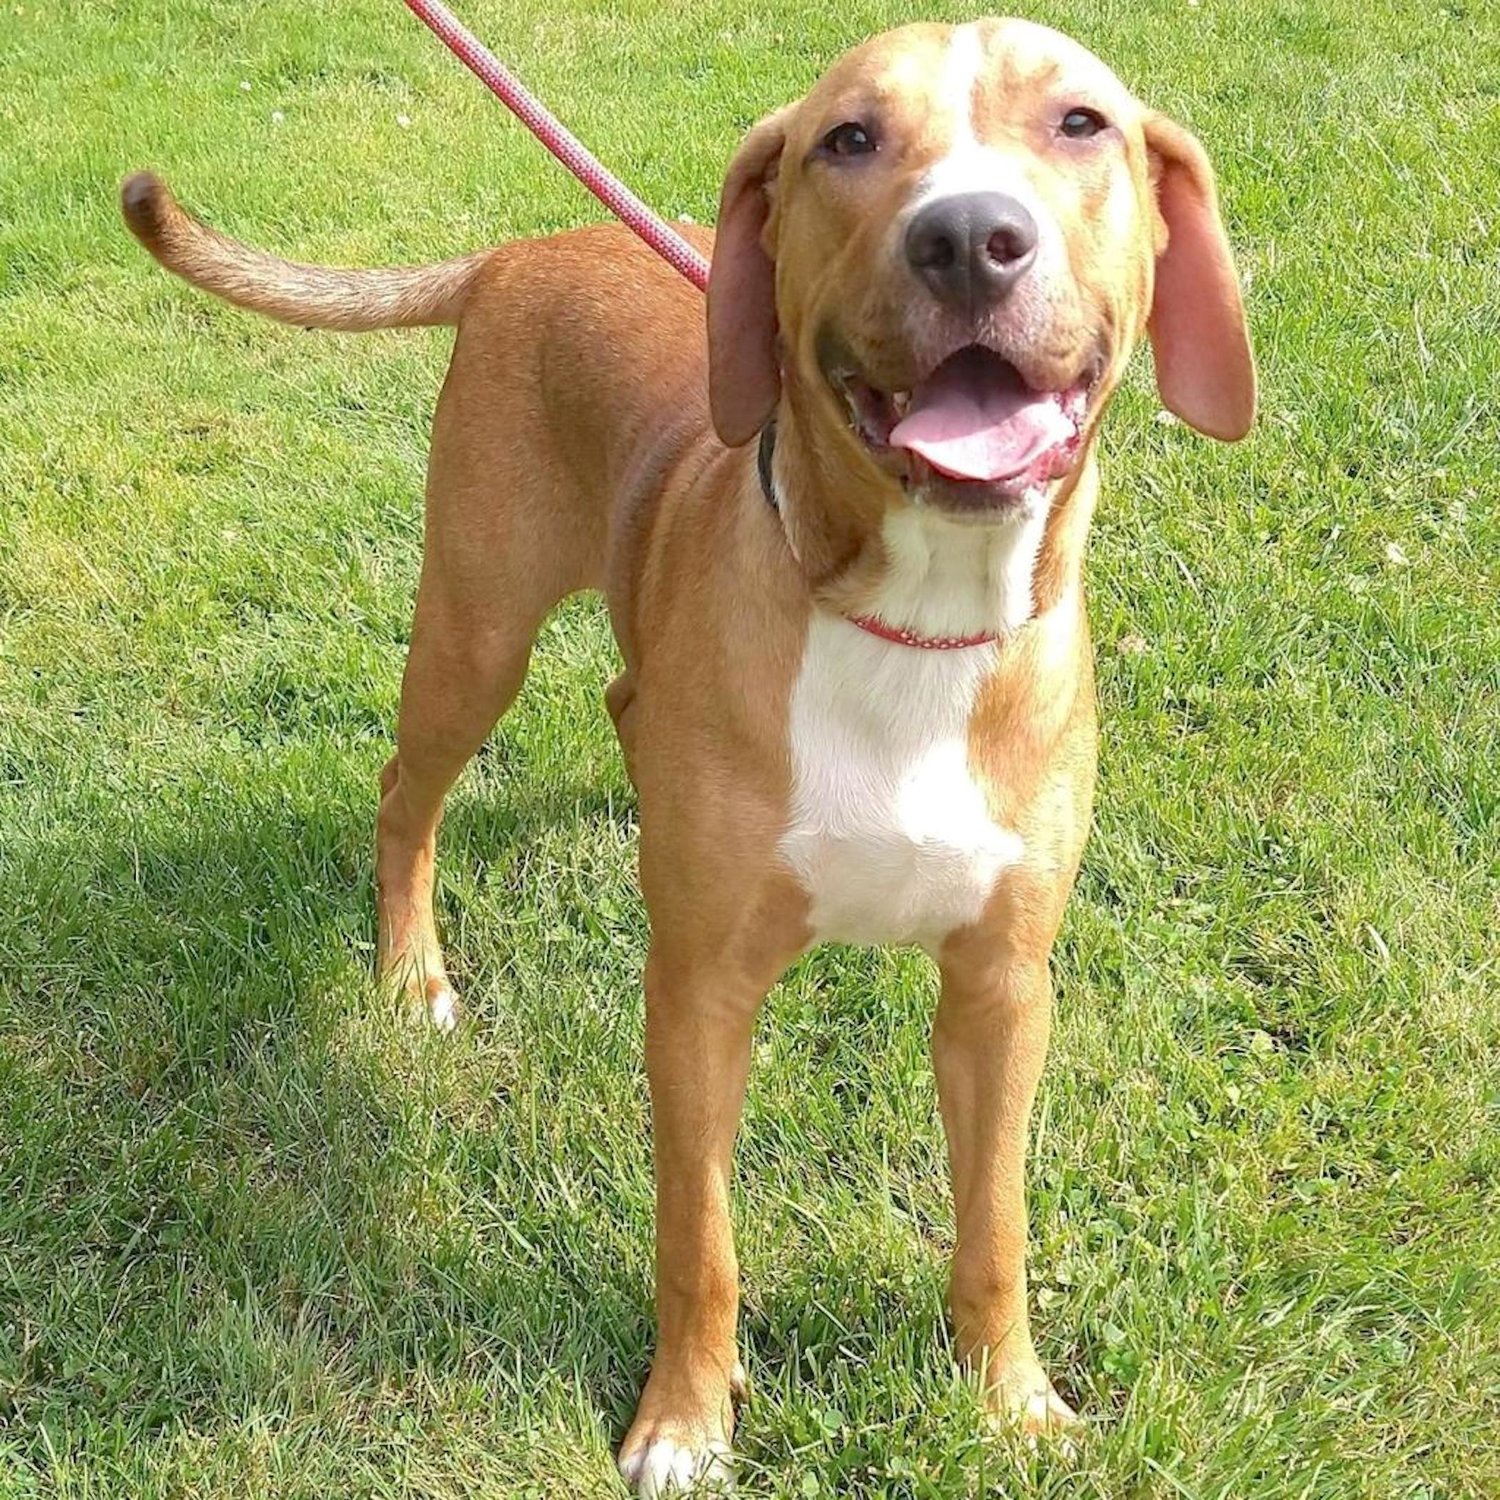 Hello! I’m Bert and I am about 4 years old. The nice people here say that I am so goofy, you might think I was a puppy! I get along with other dogs and I love playing. I’m full of energy and would love some more people to play with. The perfect family for me would be one that loves to go outside, is active, and has lots of love to give. If you would like to meet Bert, stop by Wanderers’ Rest Humane Association, 7138 Sutherland Drive, Canastota, or call at 315-697-2796.